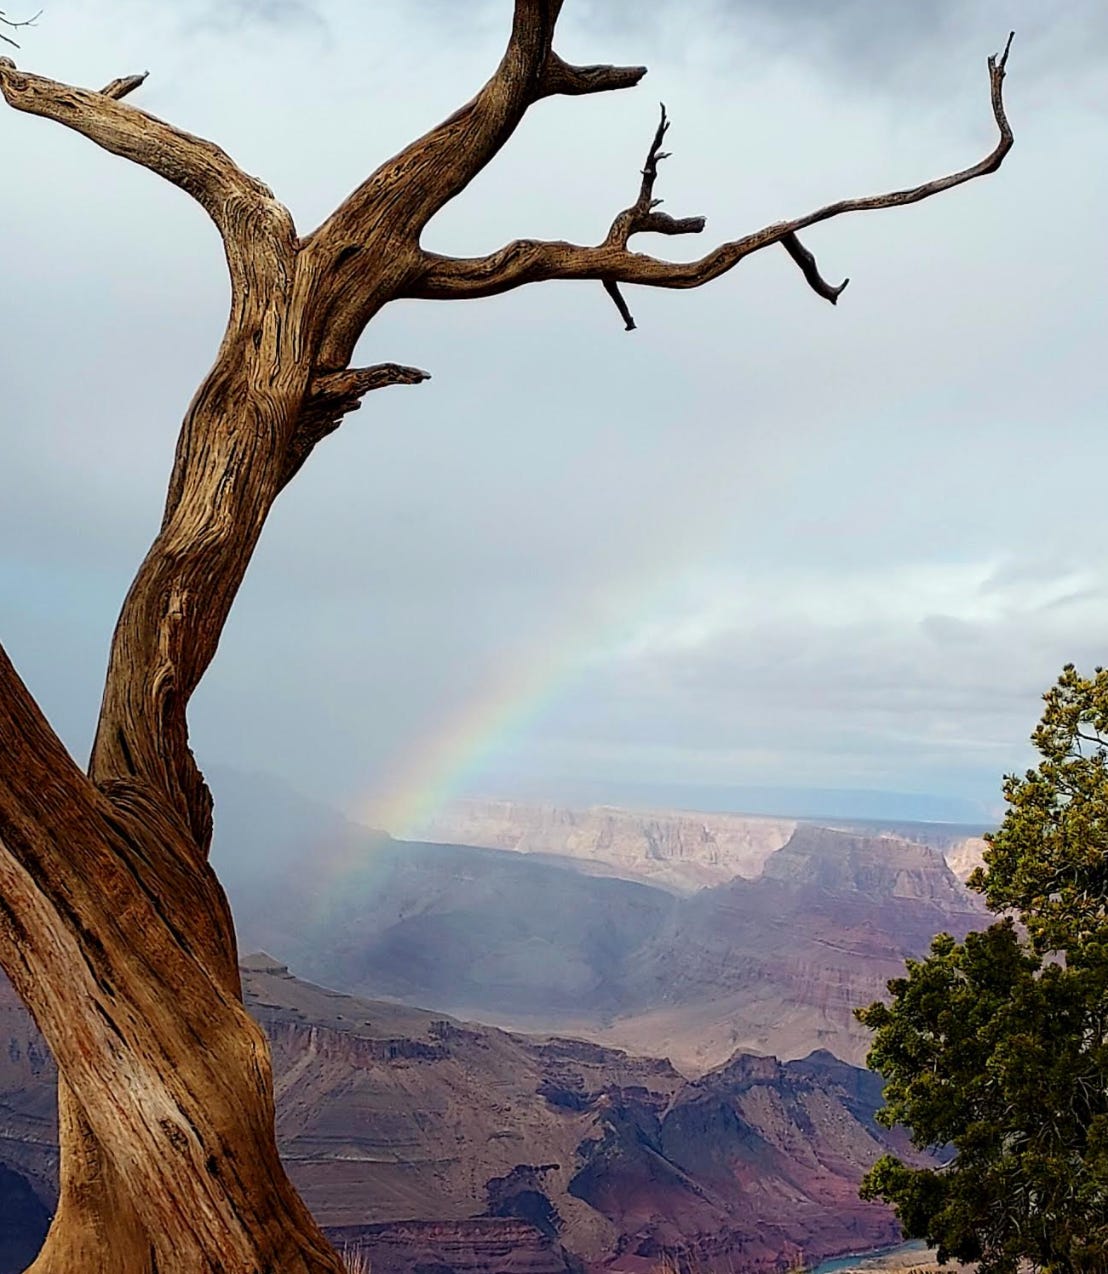 A gnarled tree, free of leaves, in the foreground in front of the Grand Canyon in winter. A rainbow in the background curves with the tree trunk down to the canyon floor below.